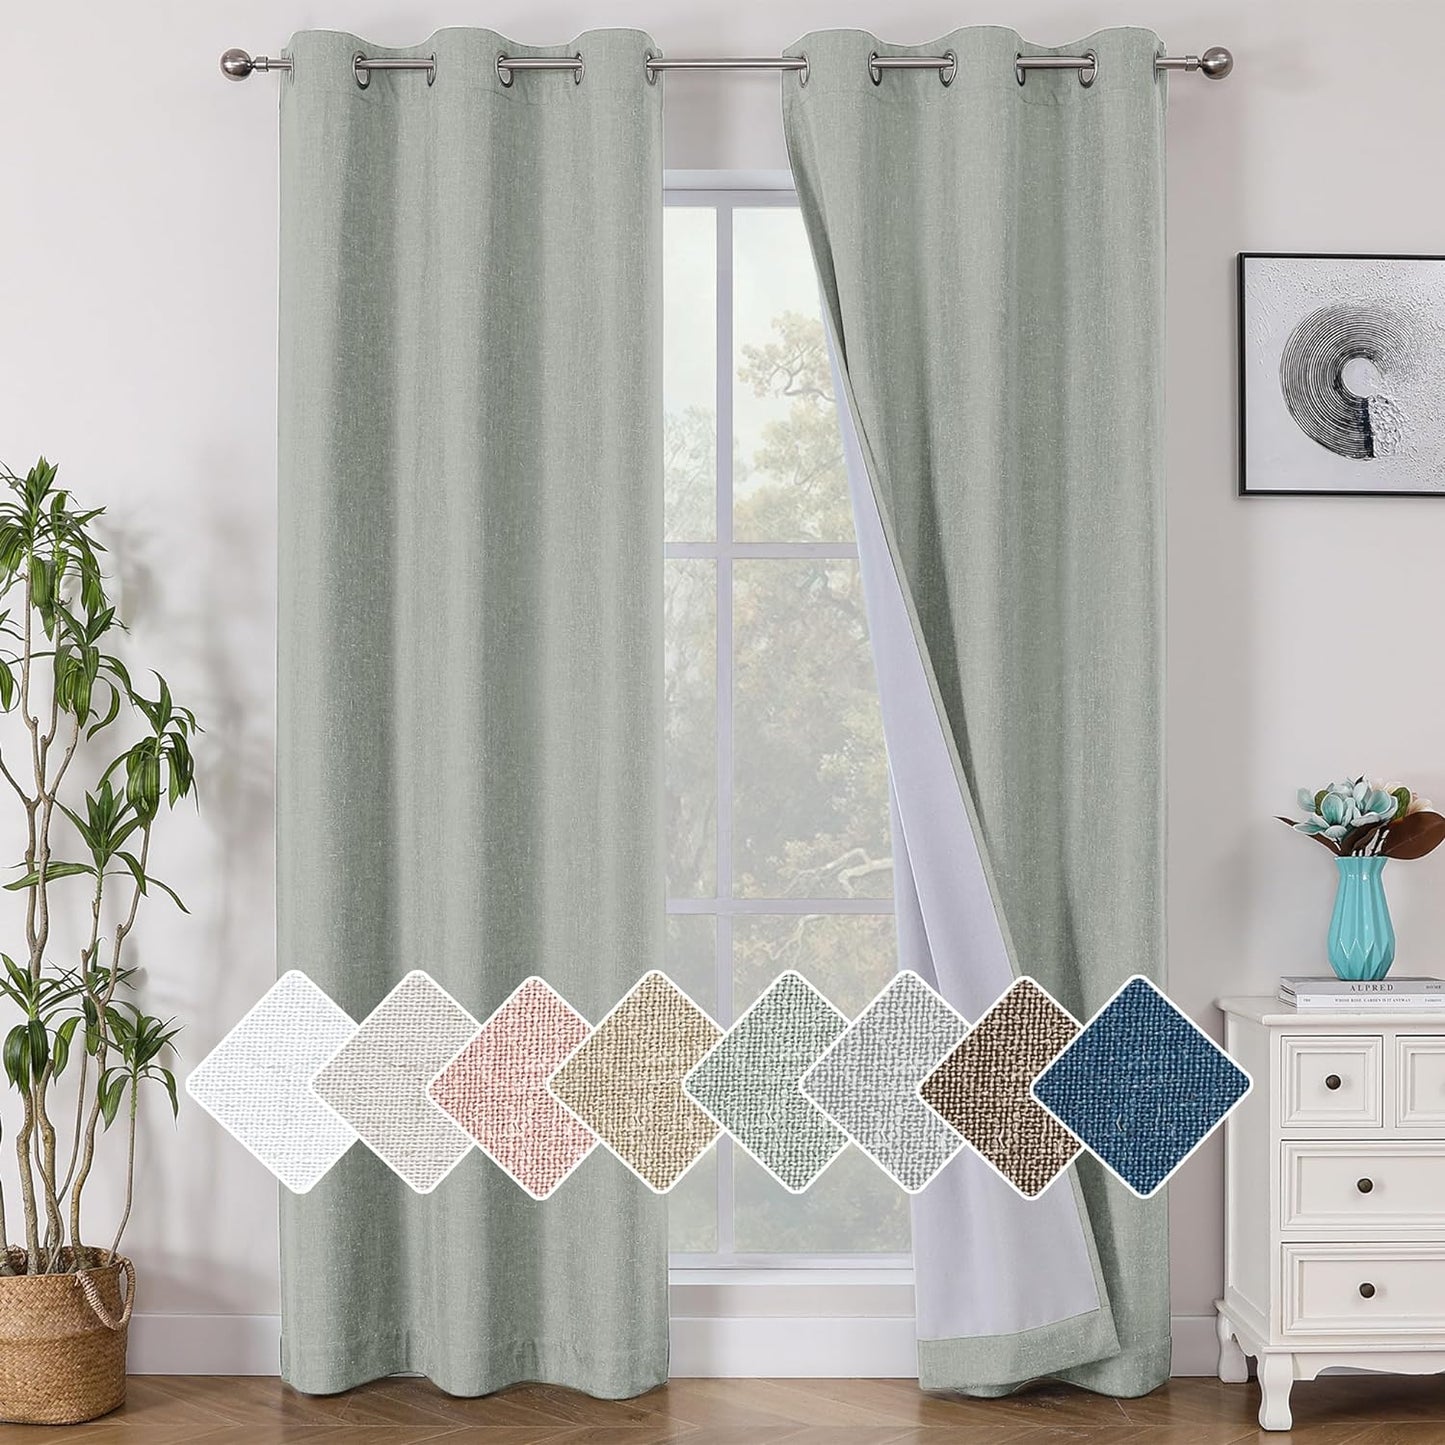 Jenny Ivory Beige Textured Linen 100% Blackout Curtains 63 Inch Length 2 Panels, Energy Saving Window Treatment Heavy Curtain Drapes for Bedroom/Living Room, Burlap Fabric Curtains, 38W  Simplebrand Sea Green 38"W X 96"L 